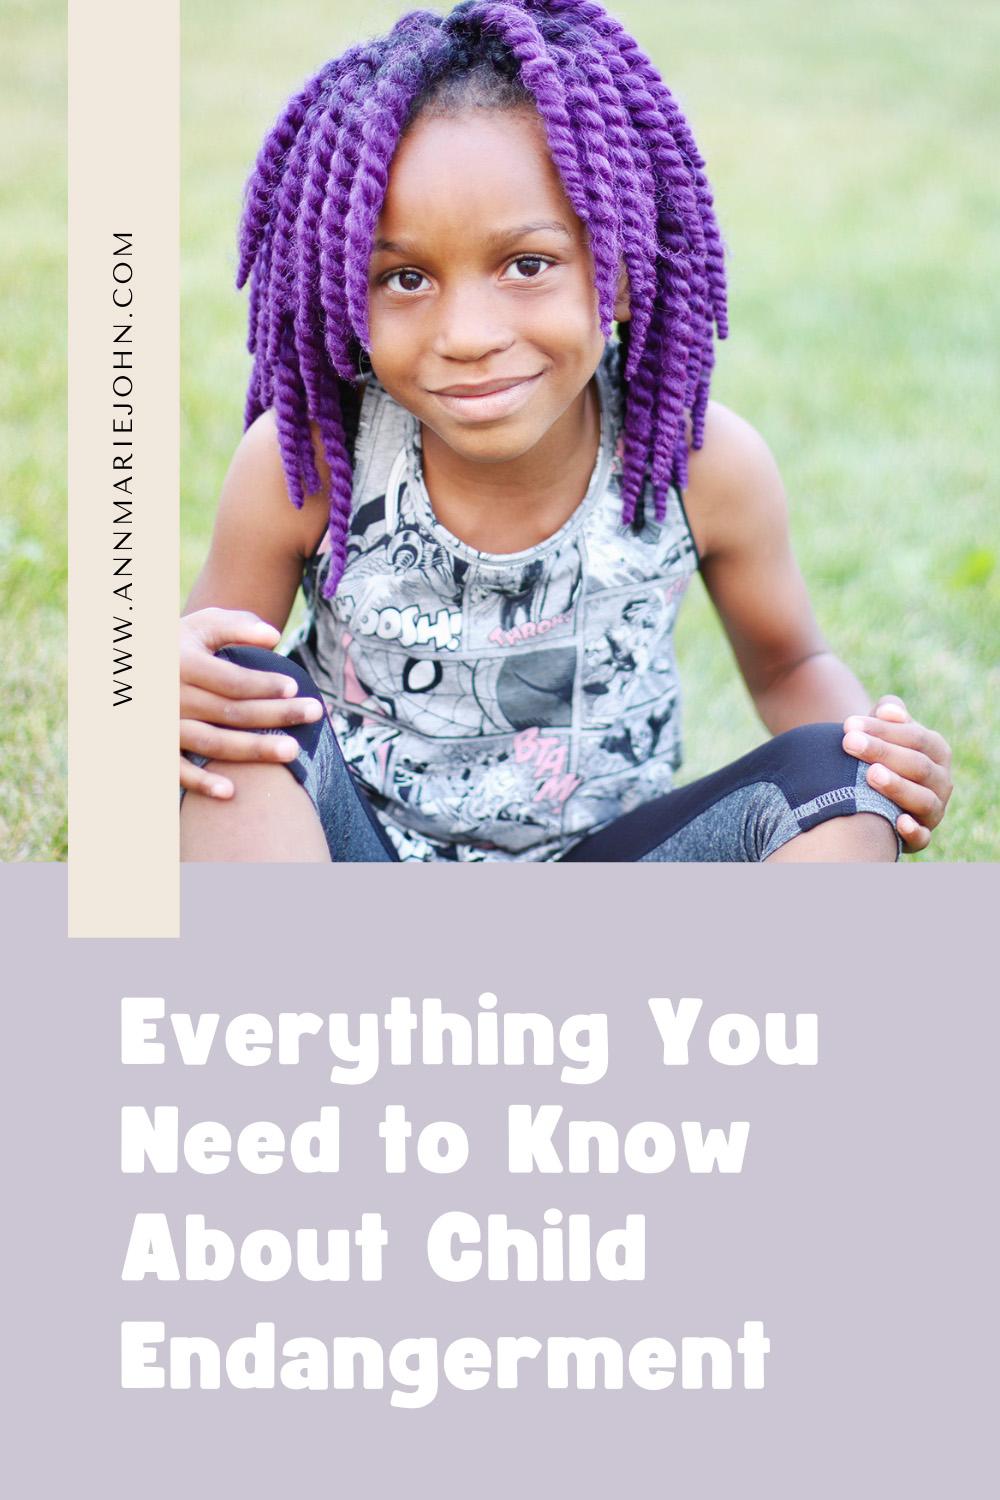 Everything You Need to Know About Child Endangerment